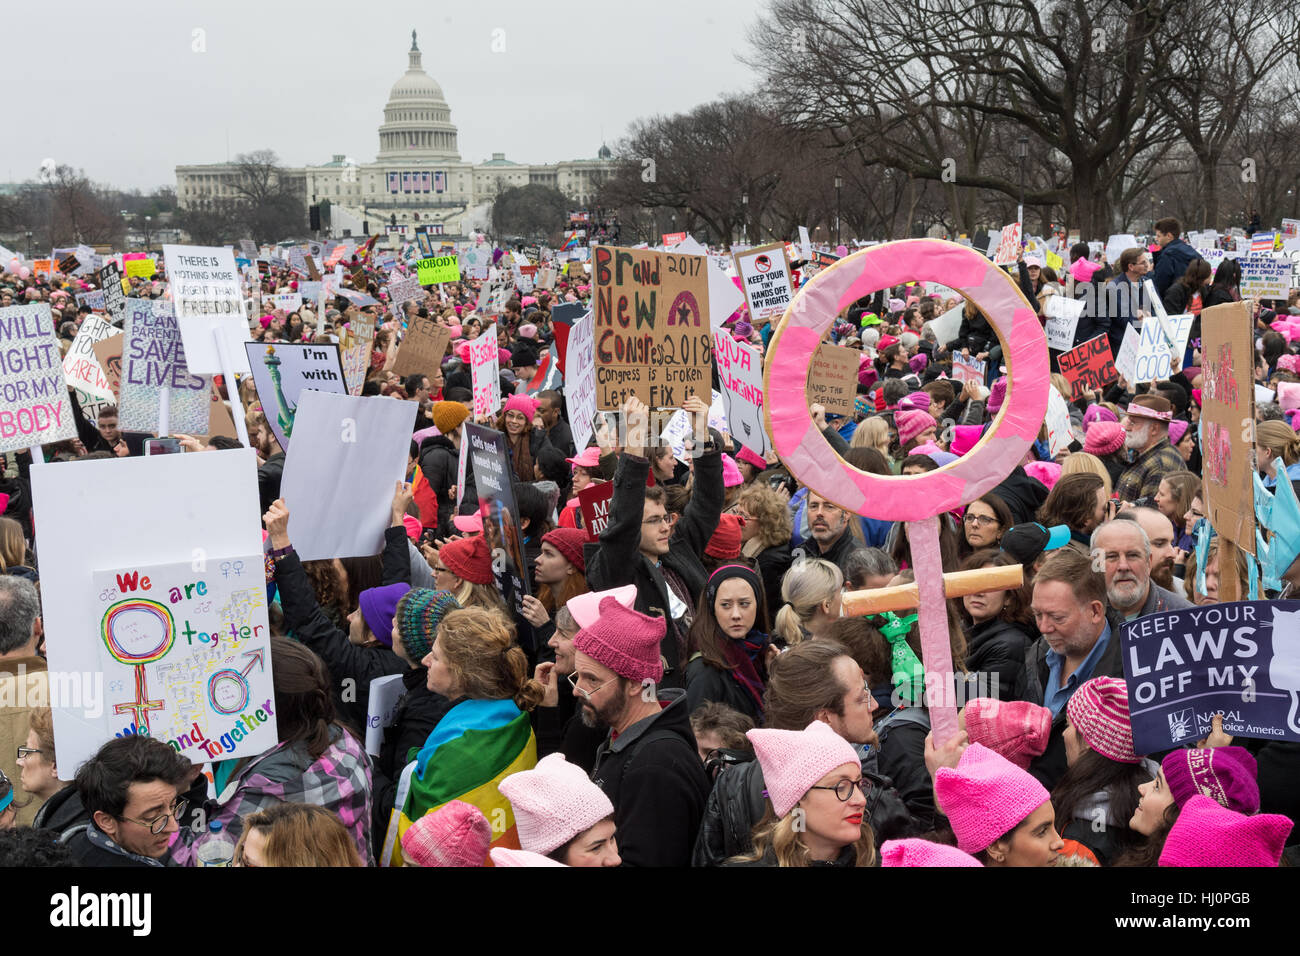 Washington, USA. 21st Jan, 2017.Demonstrators wave signs during the Women's March on Washington in protest to President Donald Trump in Washington, DC. More than 500,000 people crammed the National Mall in a peaceful and festival rally in a rebuke of the new president. Credit: Planetpix/Alamy Live News Stock Photo